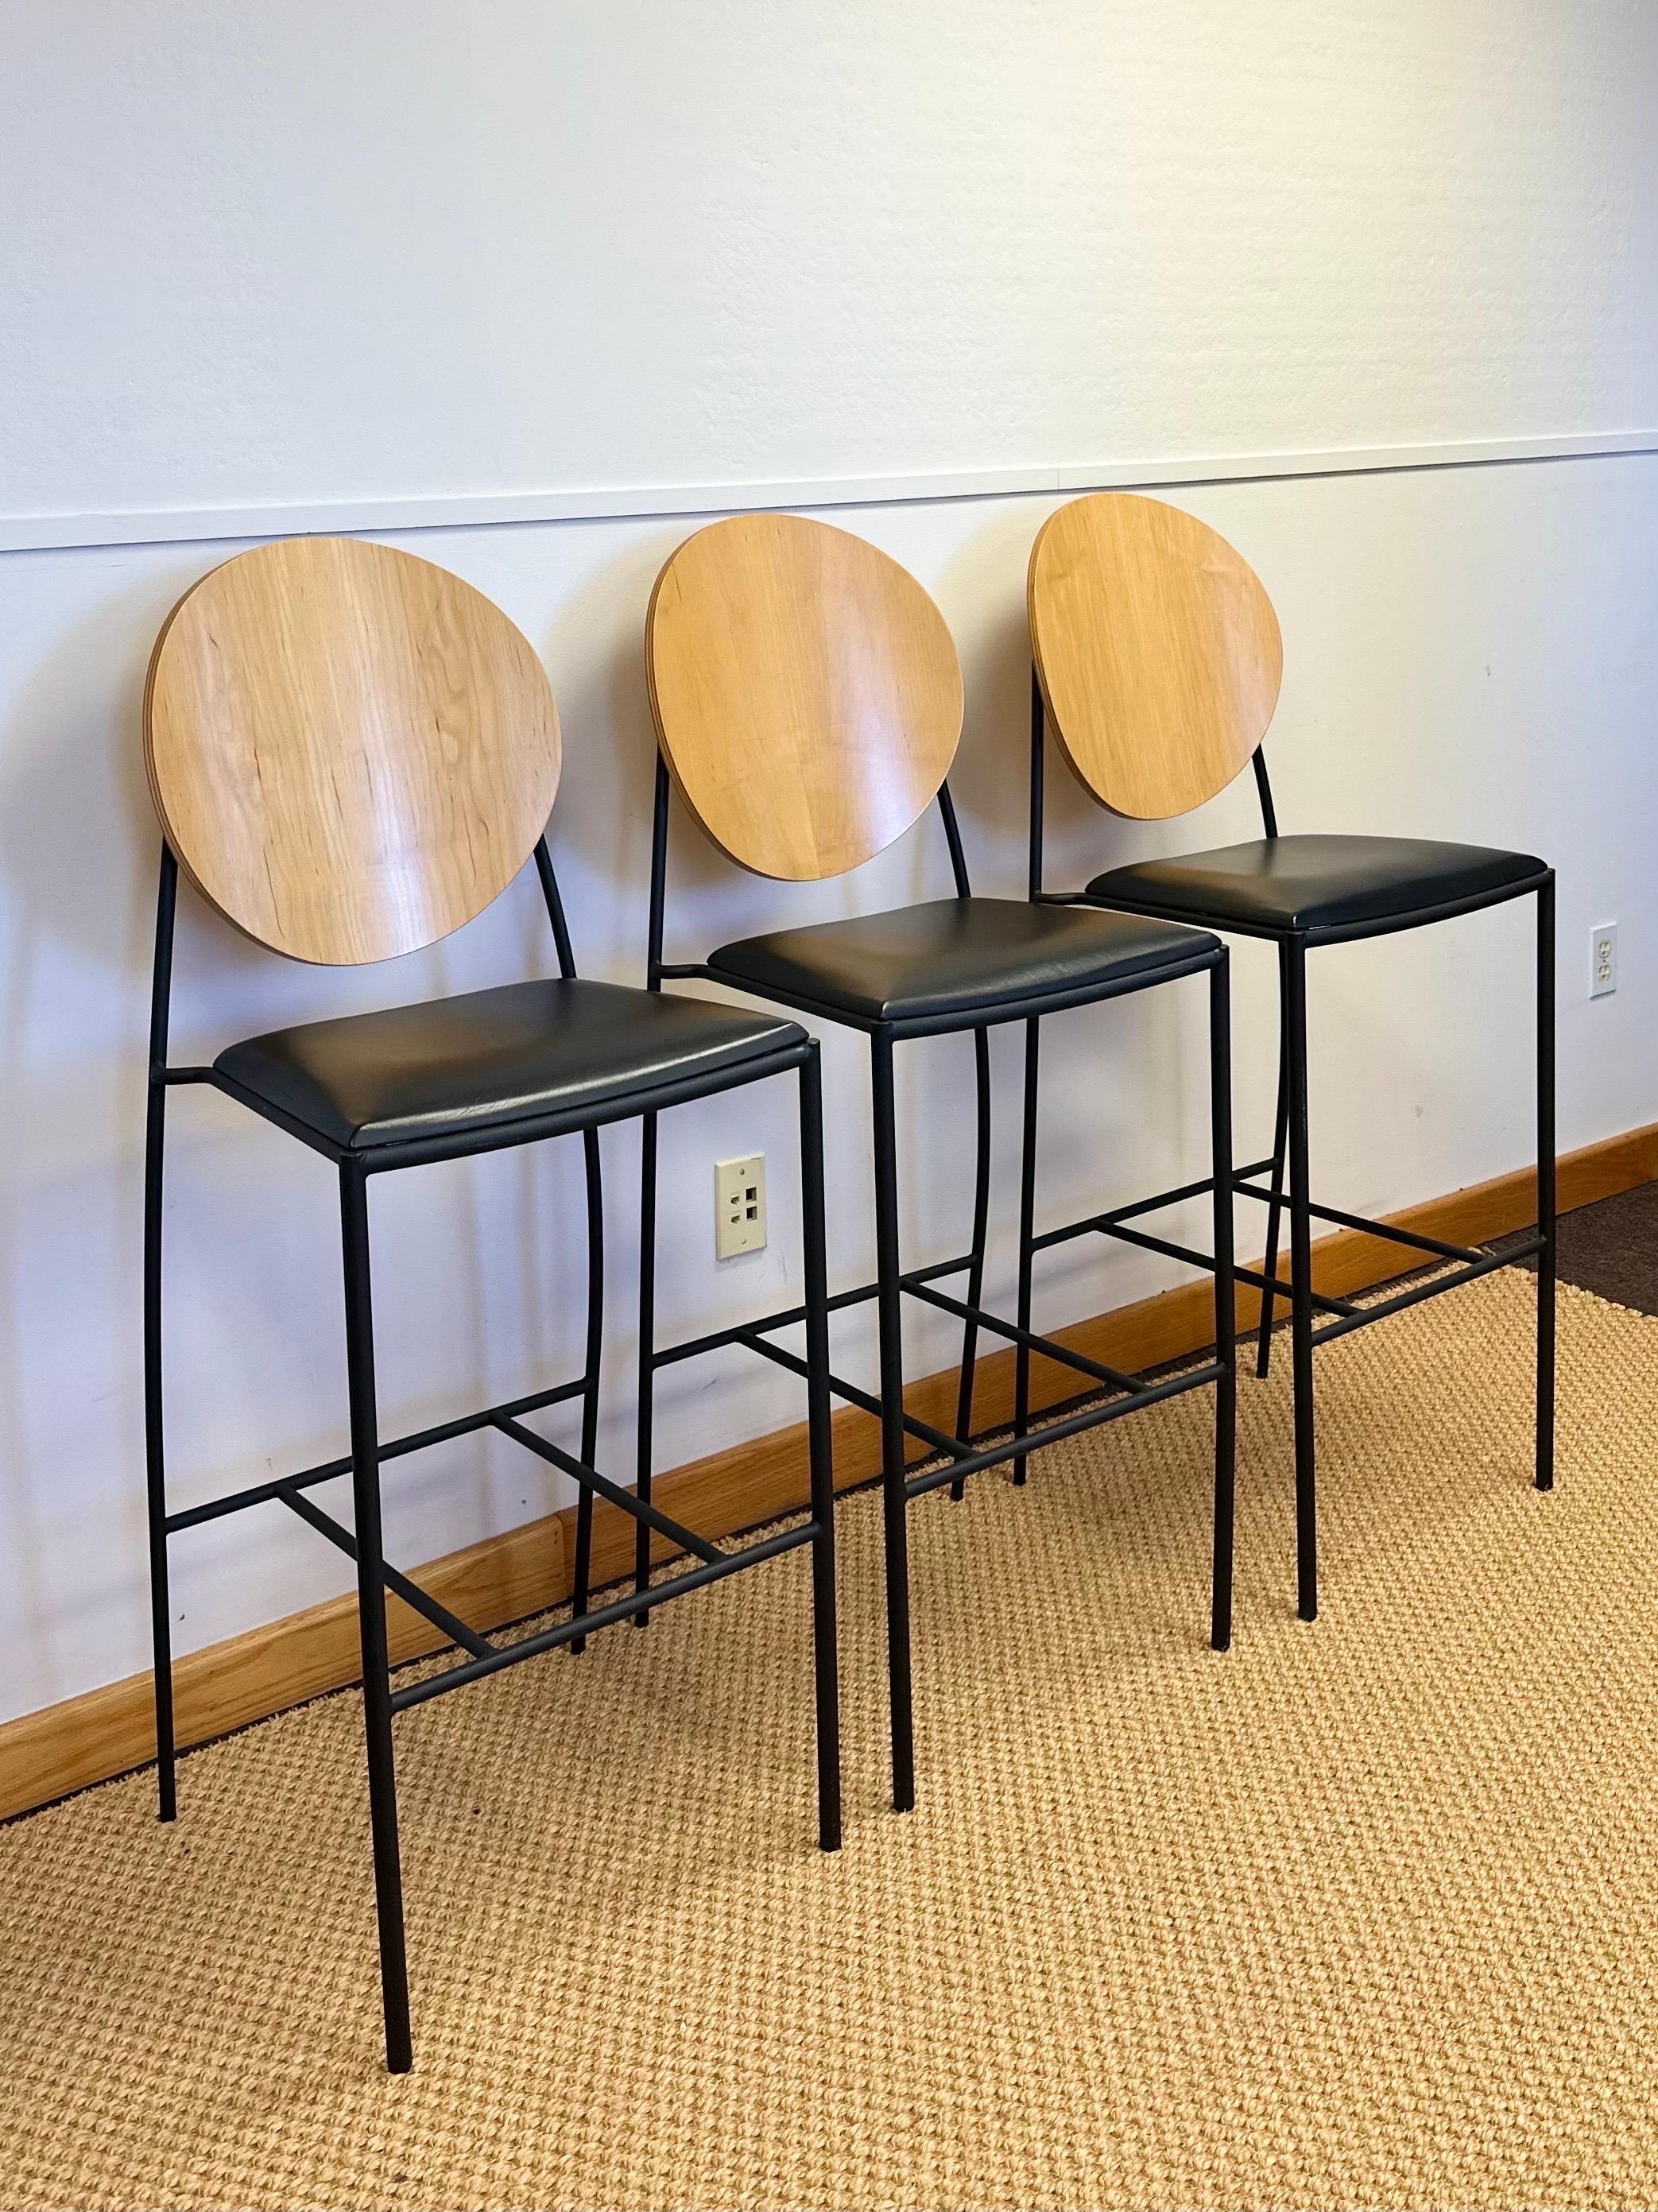 Dakota Jackson Vik-ter II Maple and Black Cushioned Counter Stools - Set of 3 In Good Condition For Sale In Farmington Hills, MI